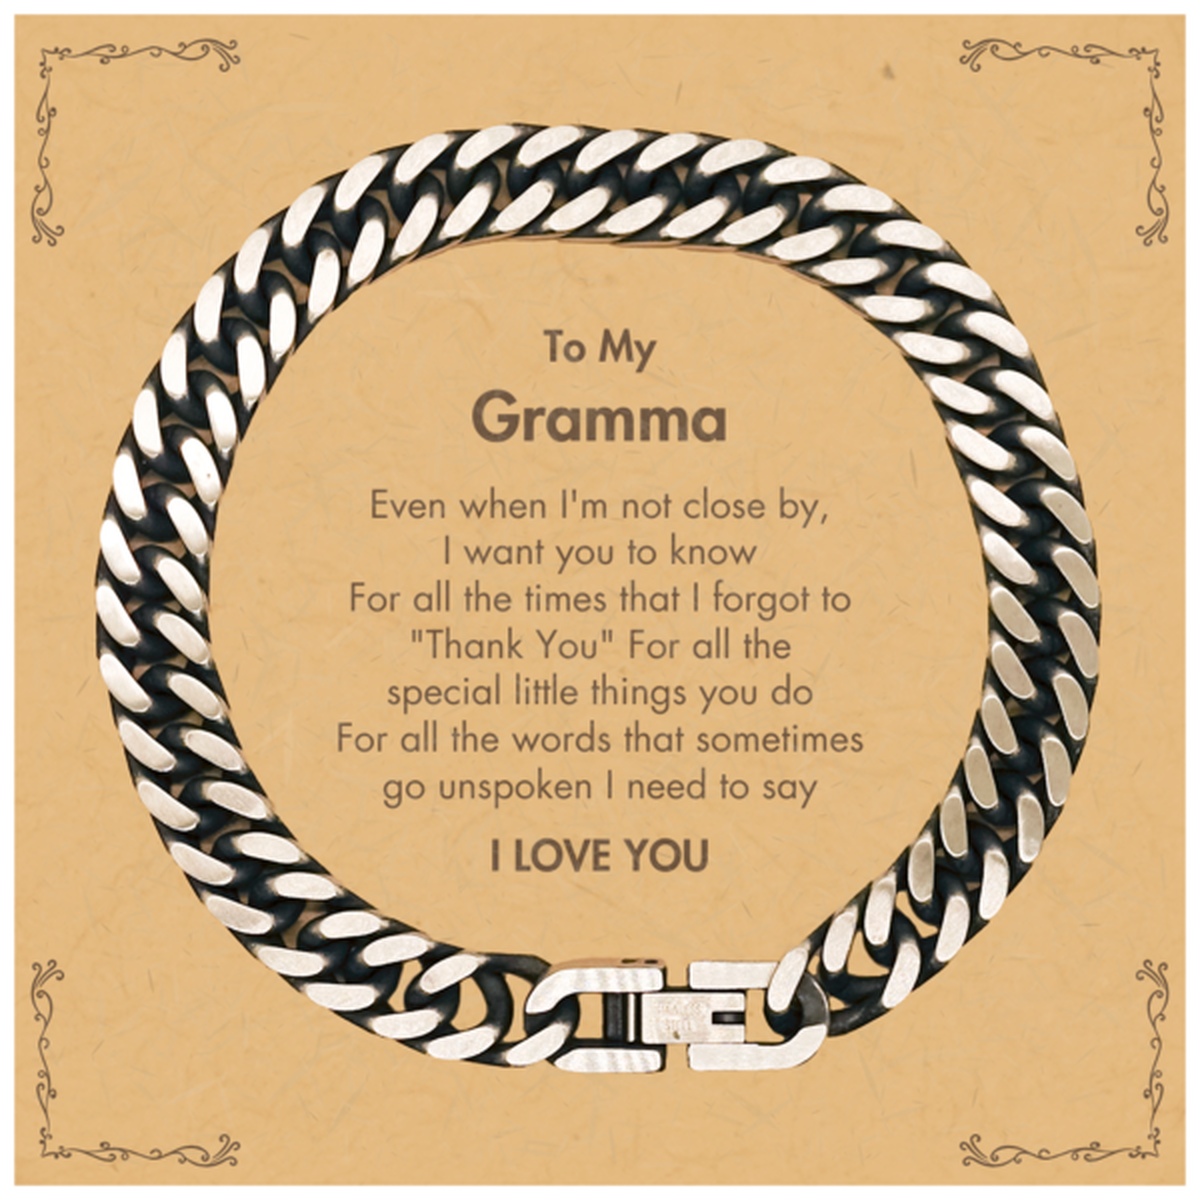 Thank You Gifts for Gramma, Keepsake Cuban Link Chain Bracelet Gifts for Gramma Birthday Mother's day Father's Day Gramma For all the words That sometimes go unspoken I need to say I LOVE YOU